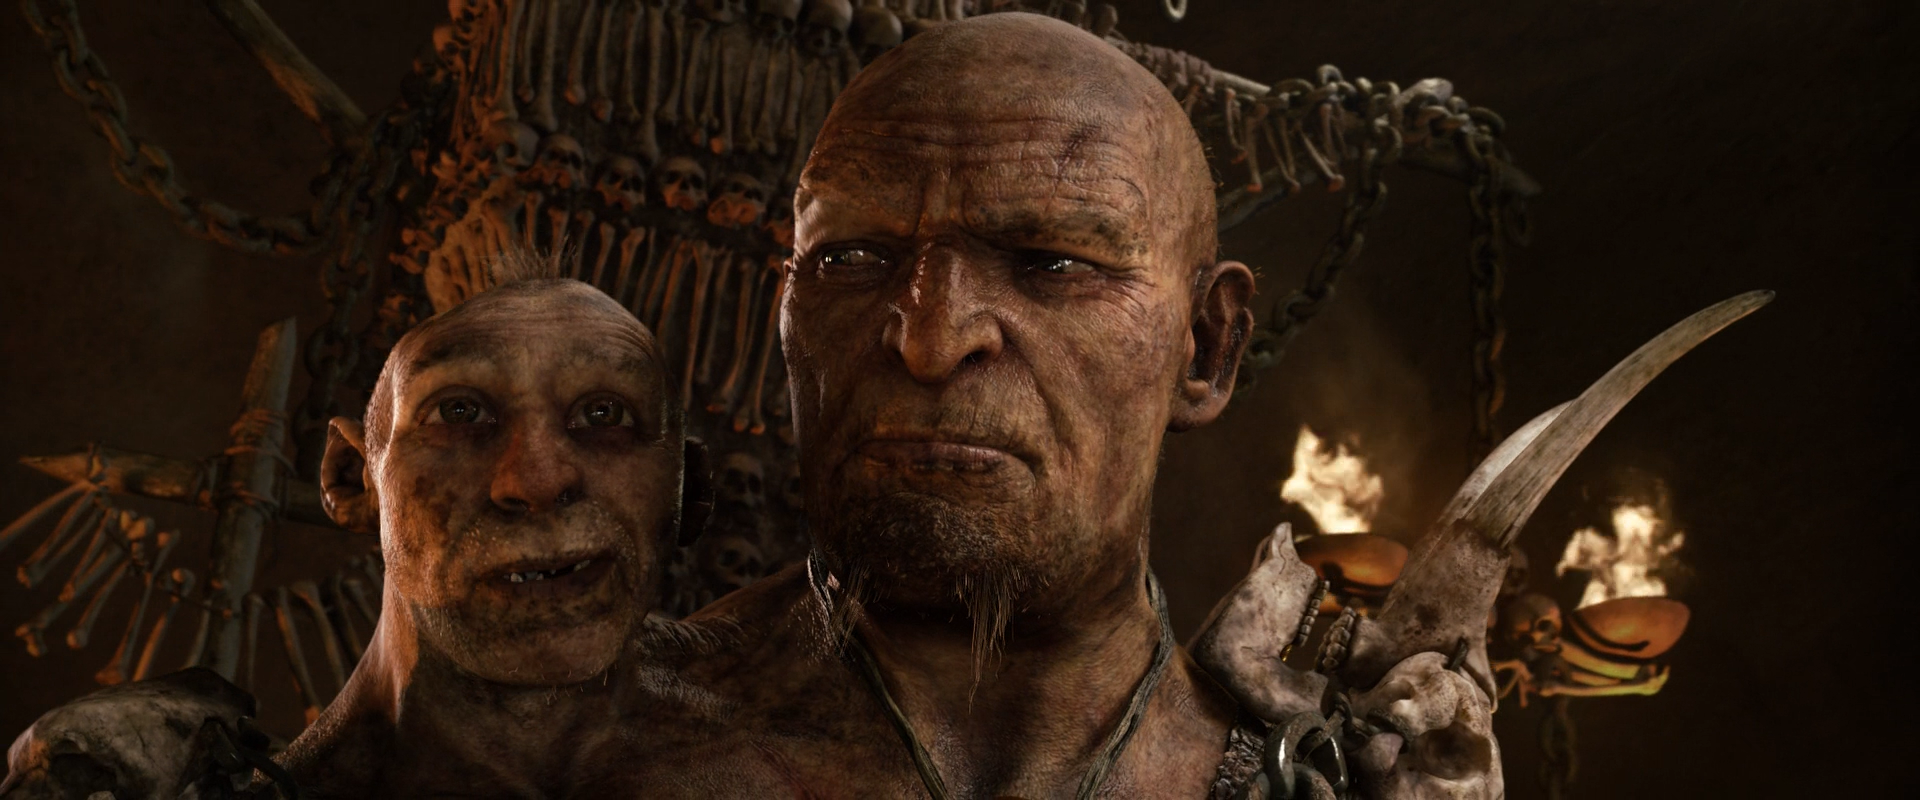 Jack the Giant Slayer 2013 Screen 08.png